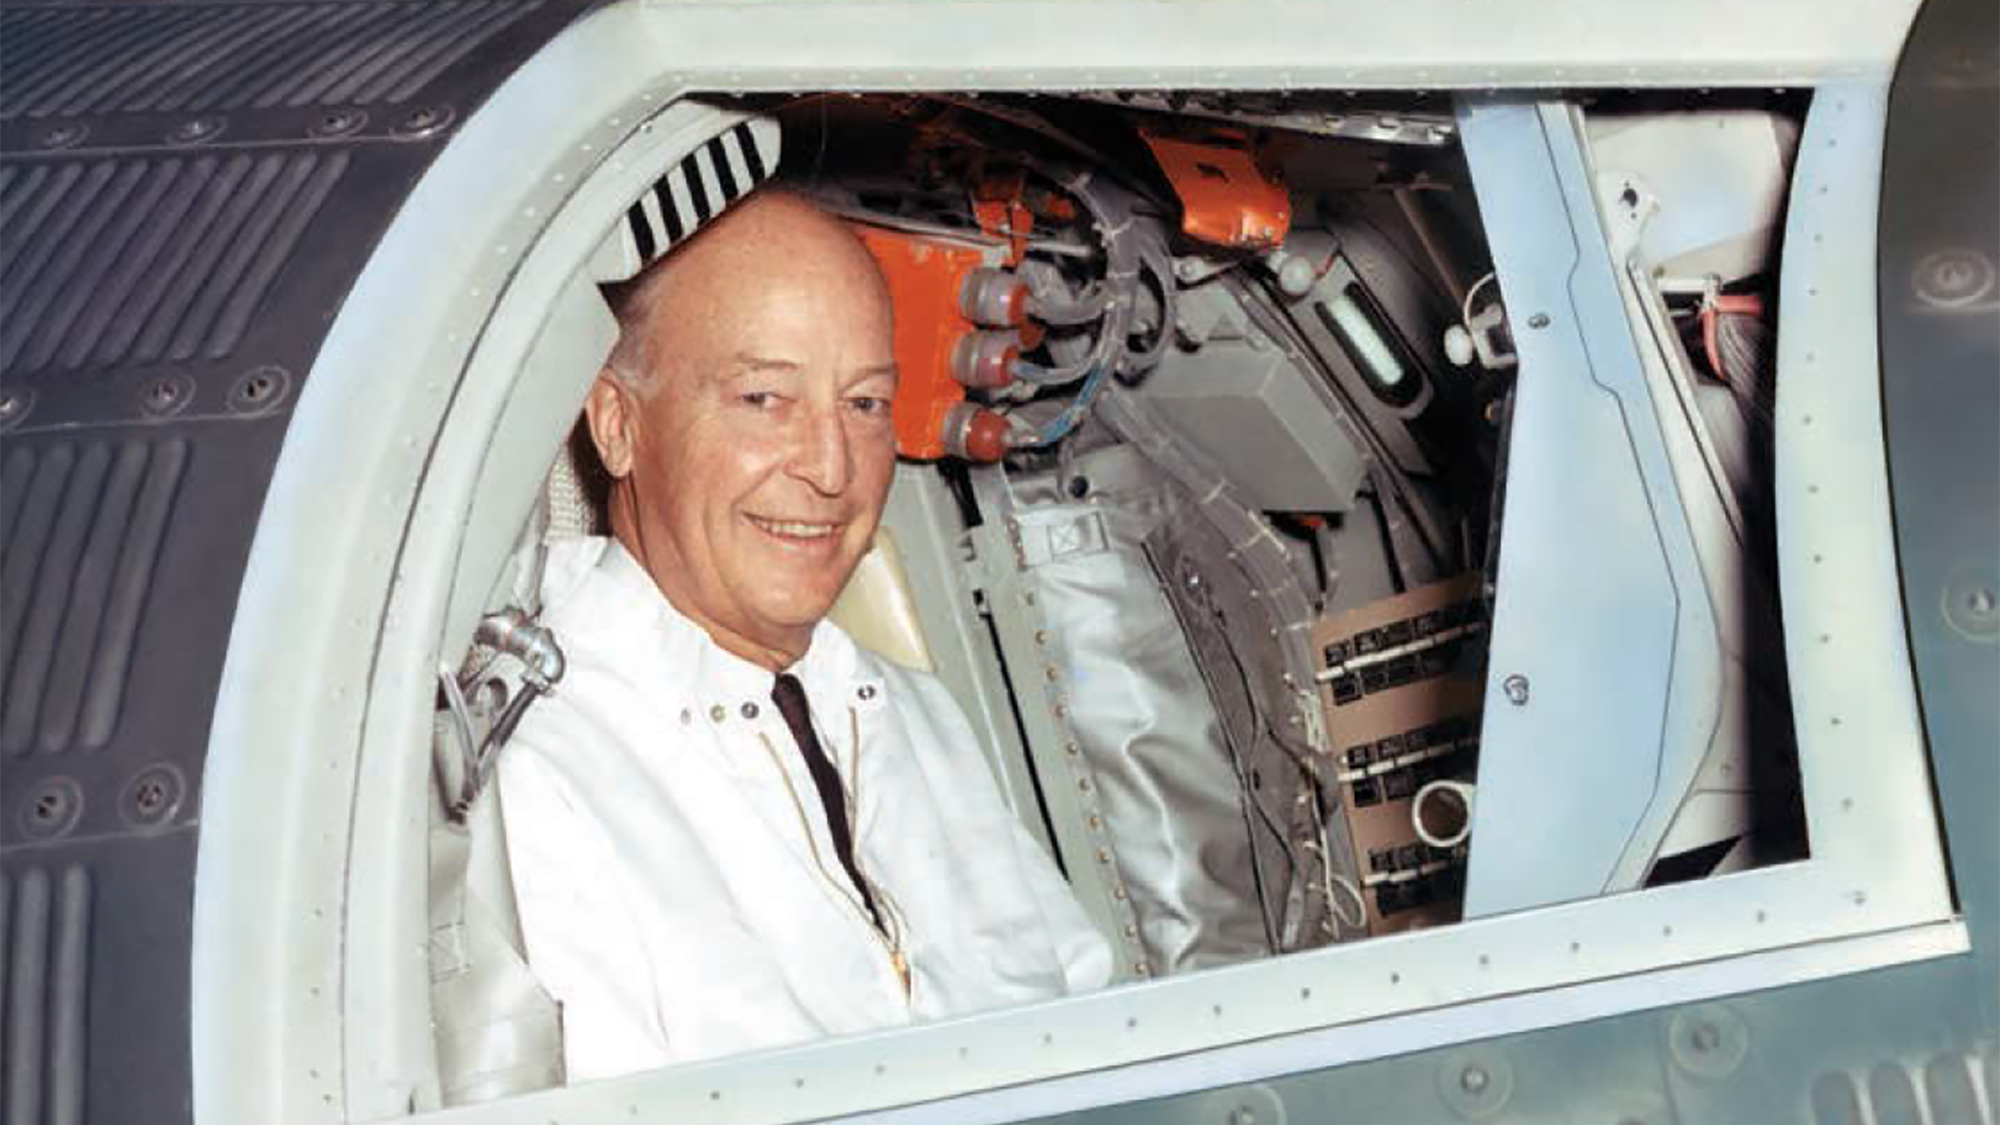 Herbert F Johnson, Jr. in a Mercury space capsule at McDonnell Aircraft